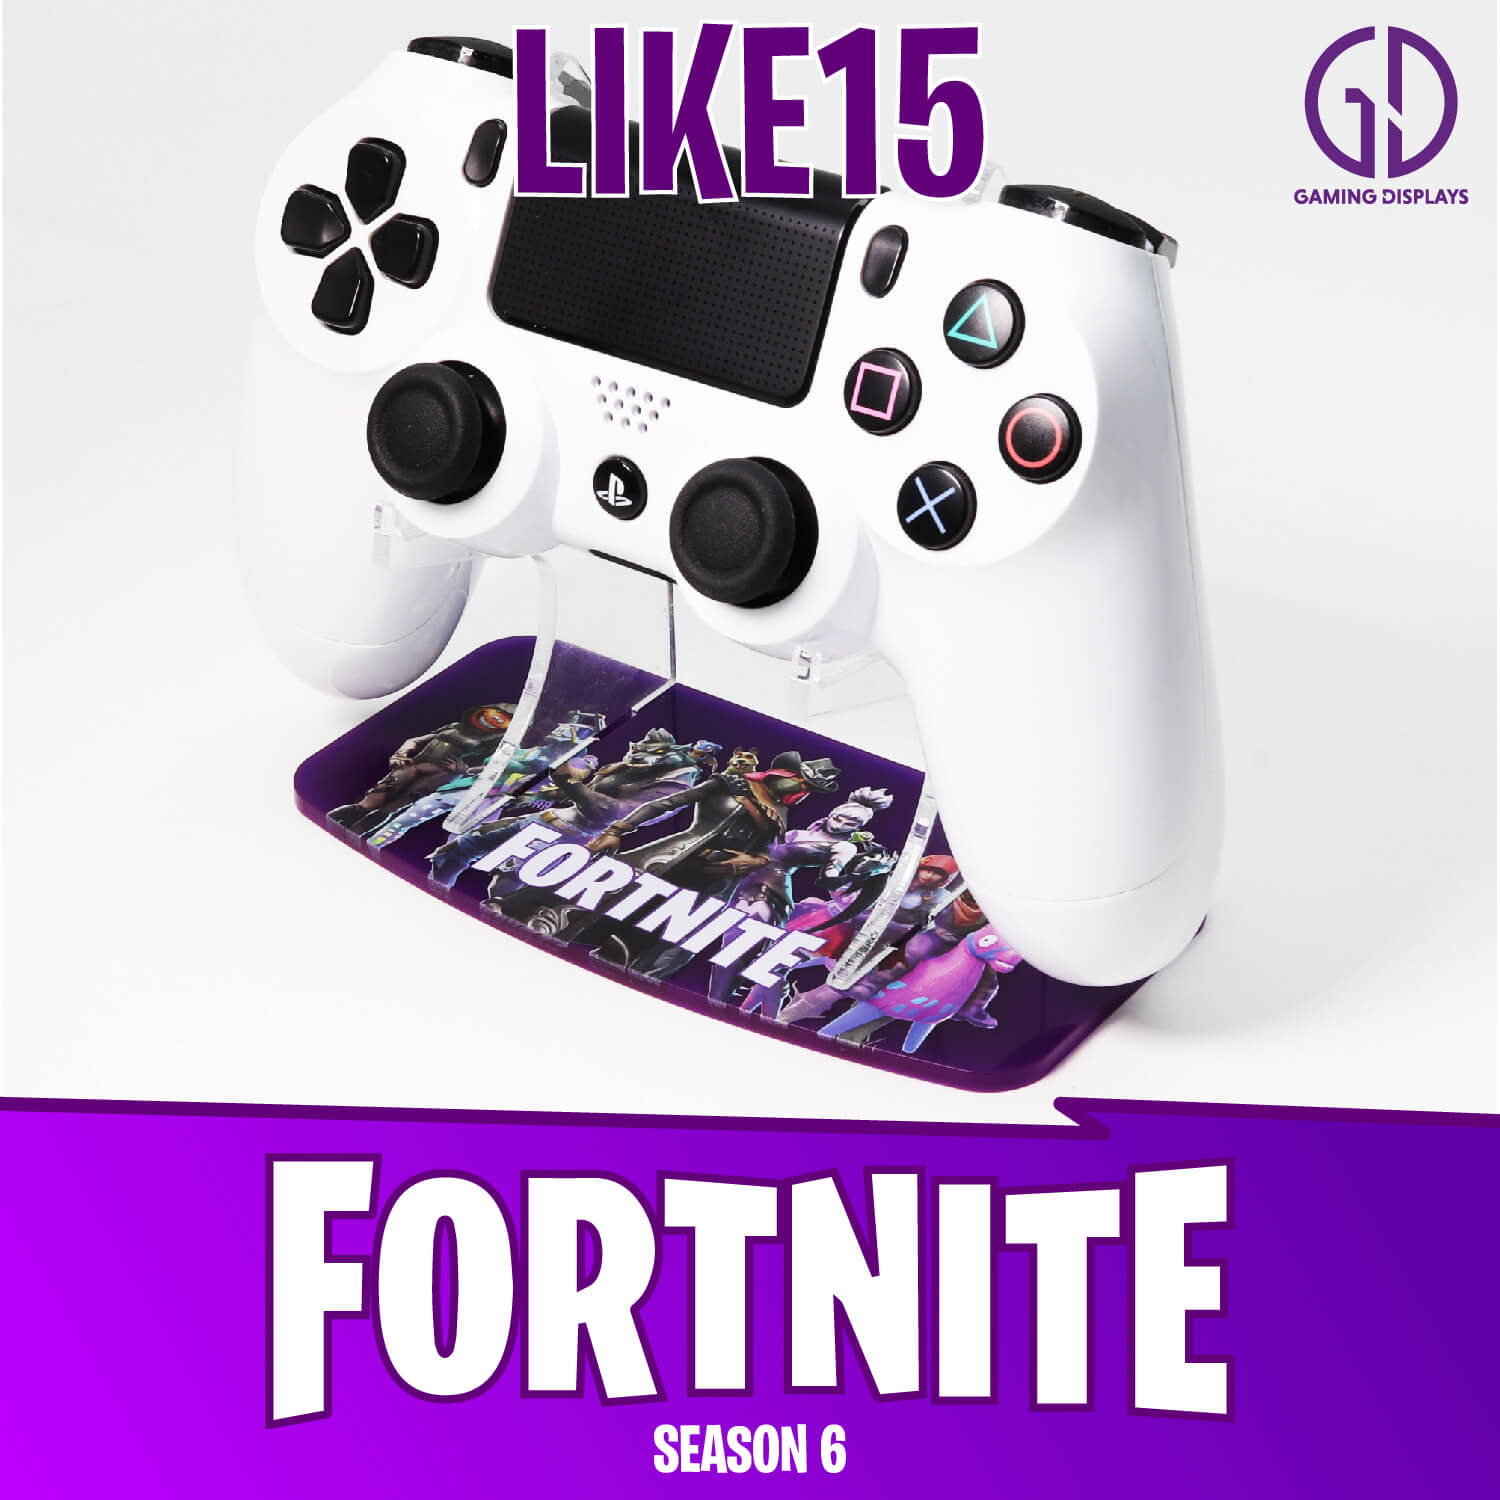 Fortnite Season 6 PS4 Printed Controller Stand in purple with characters and game title